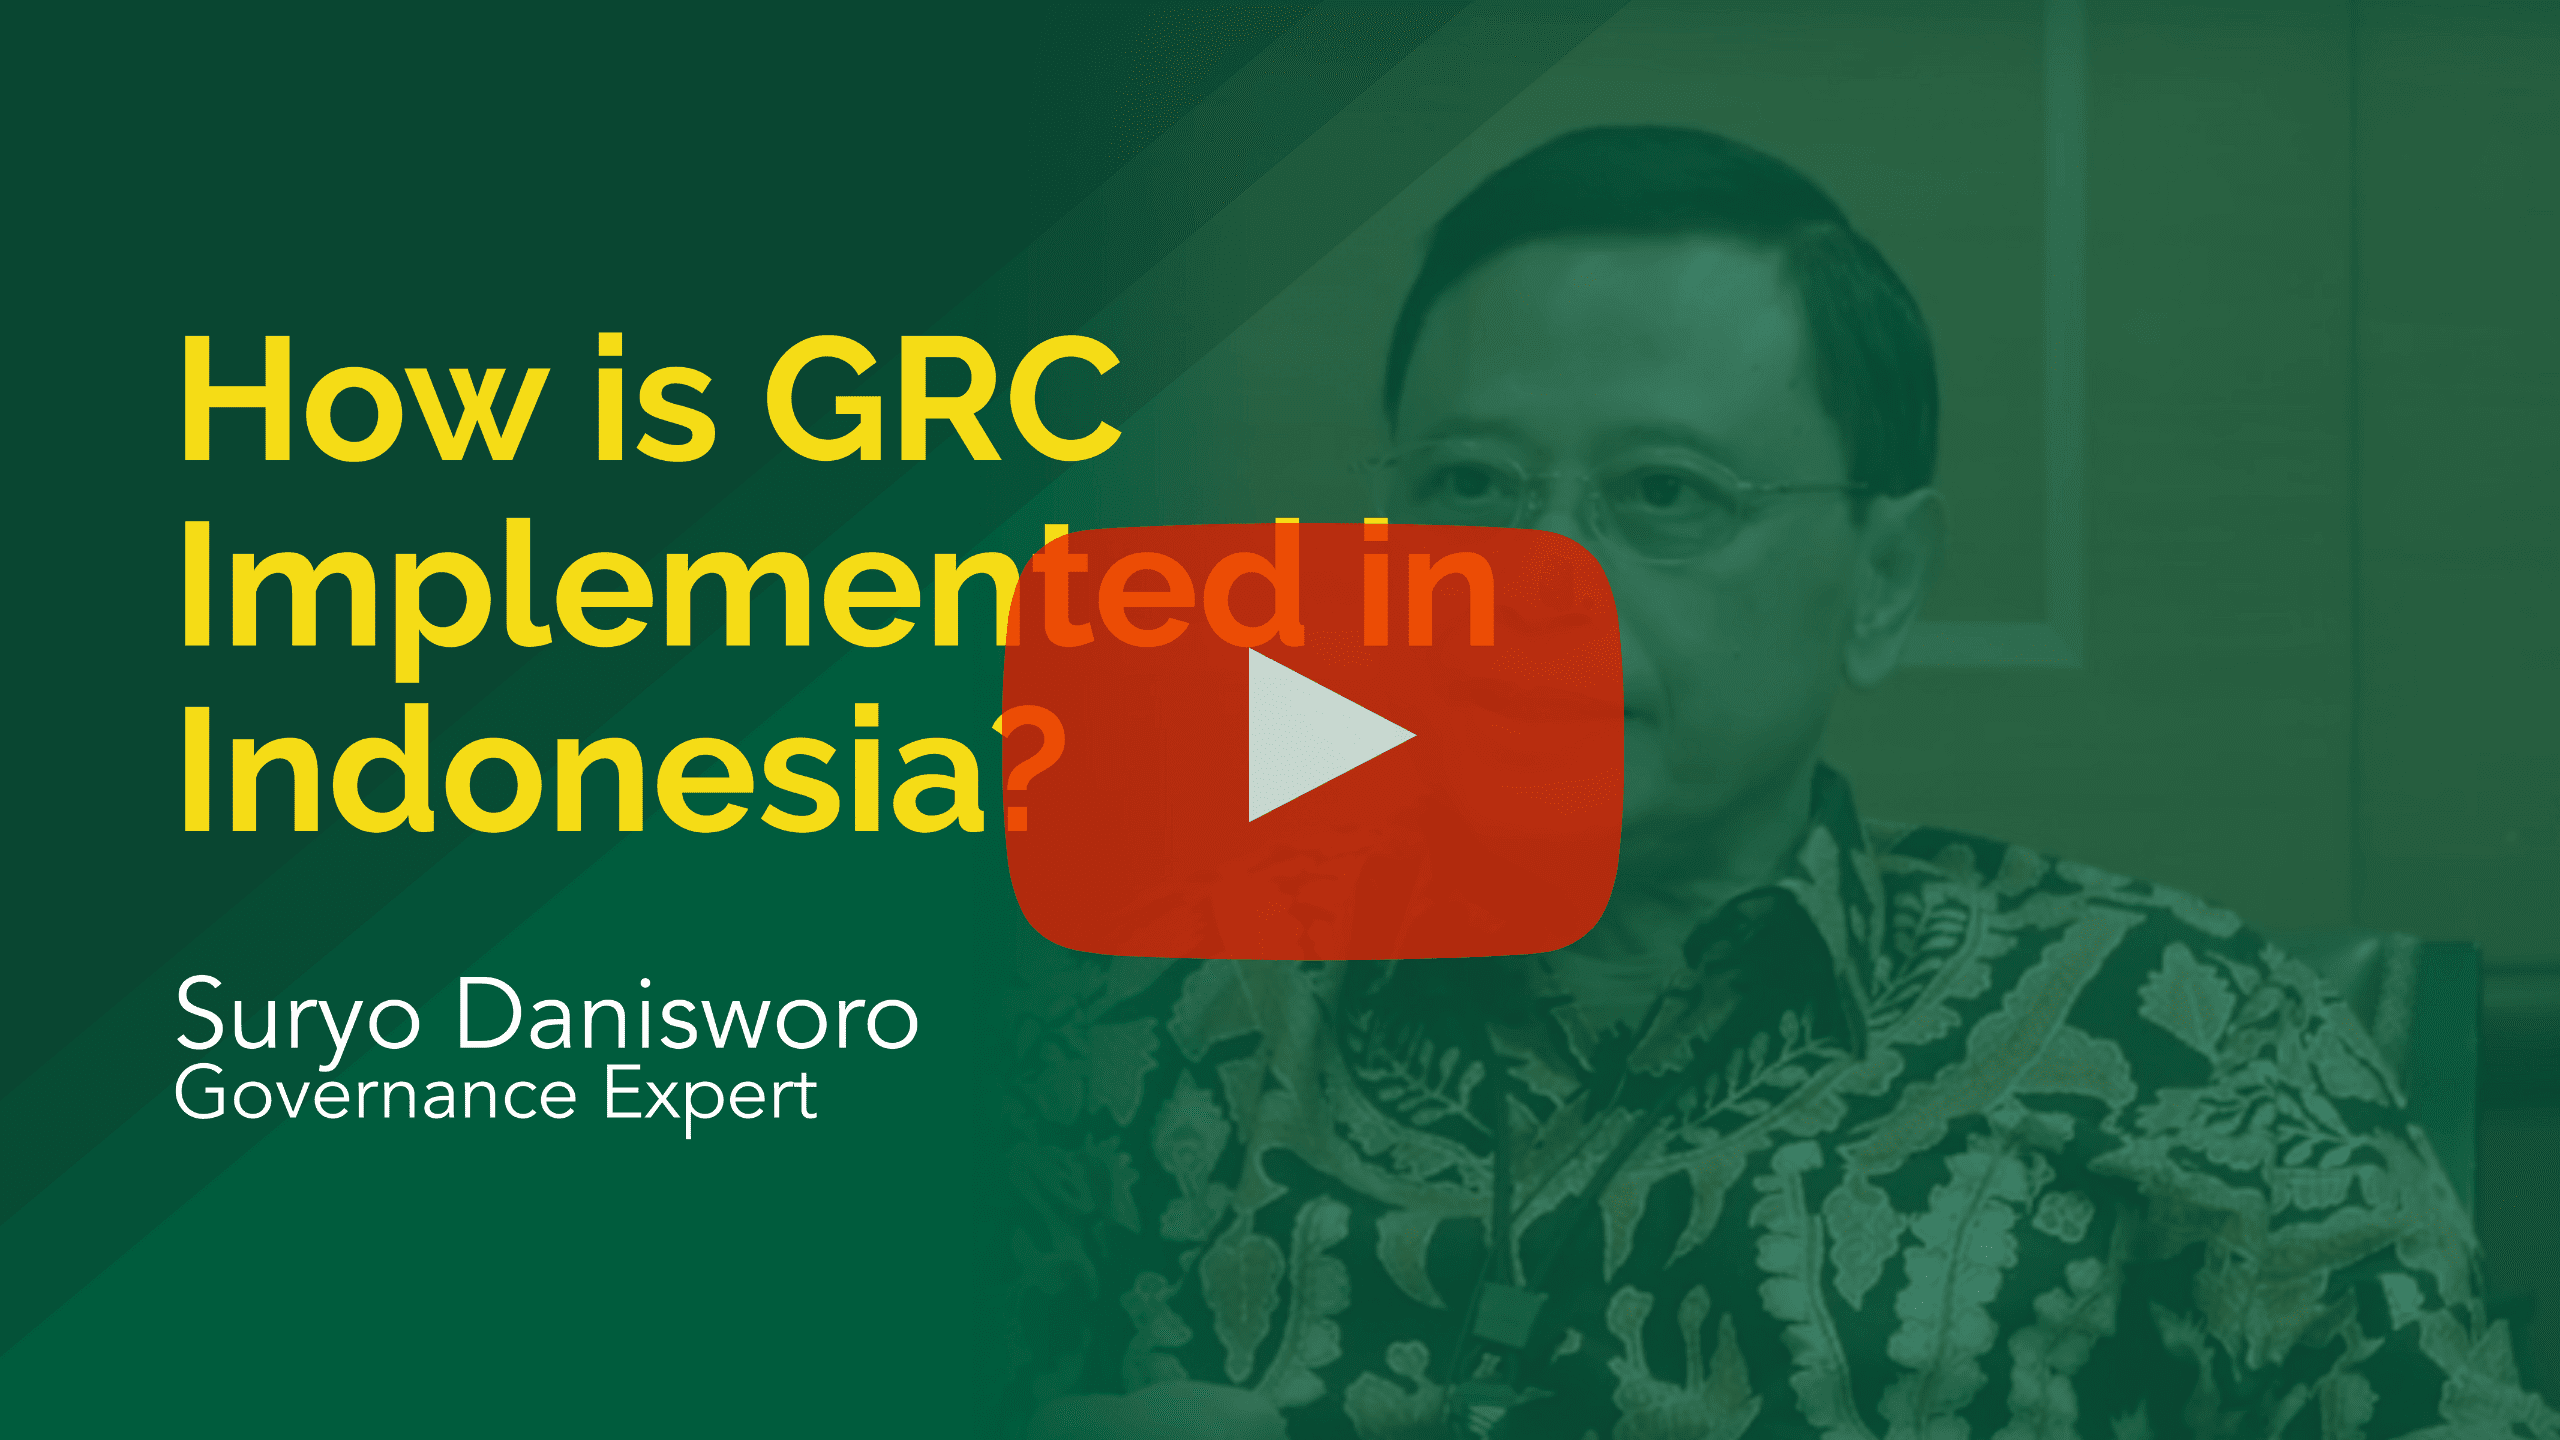 How is GRC Implemented in Indonesia?